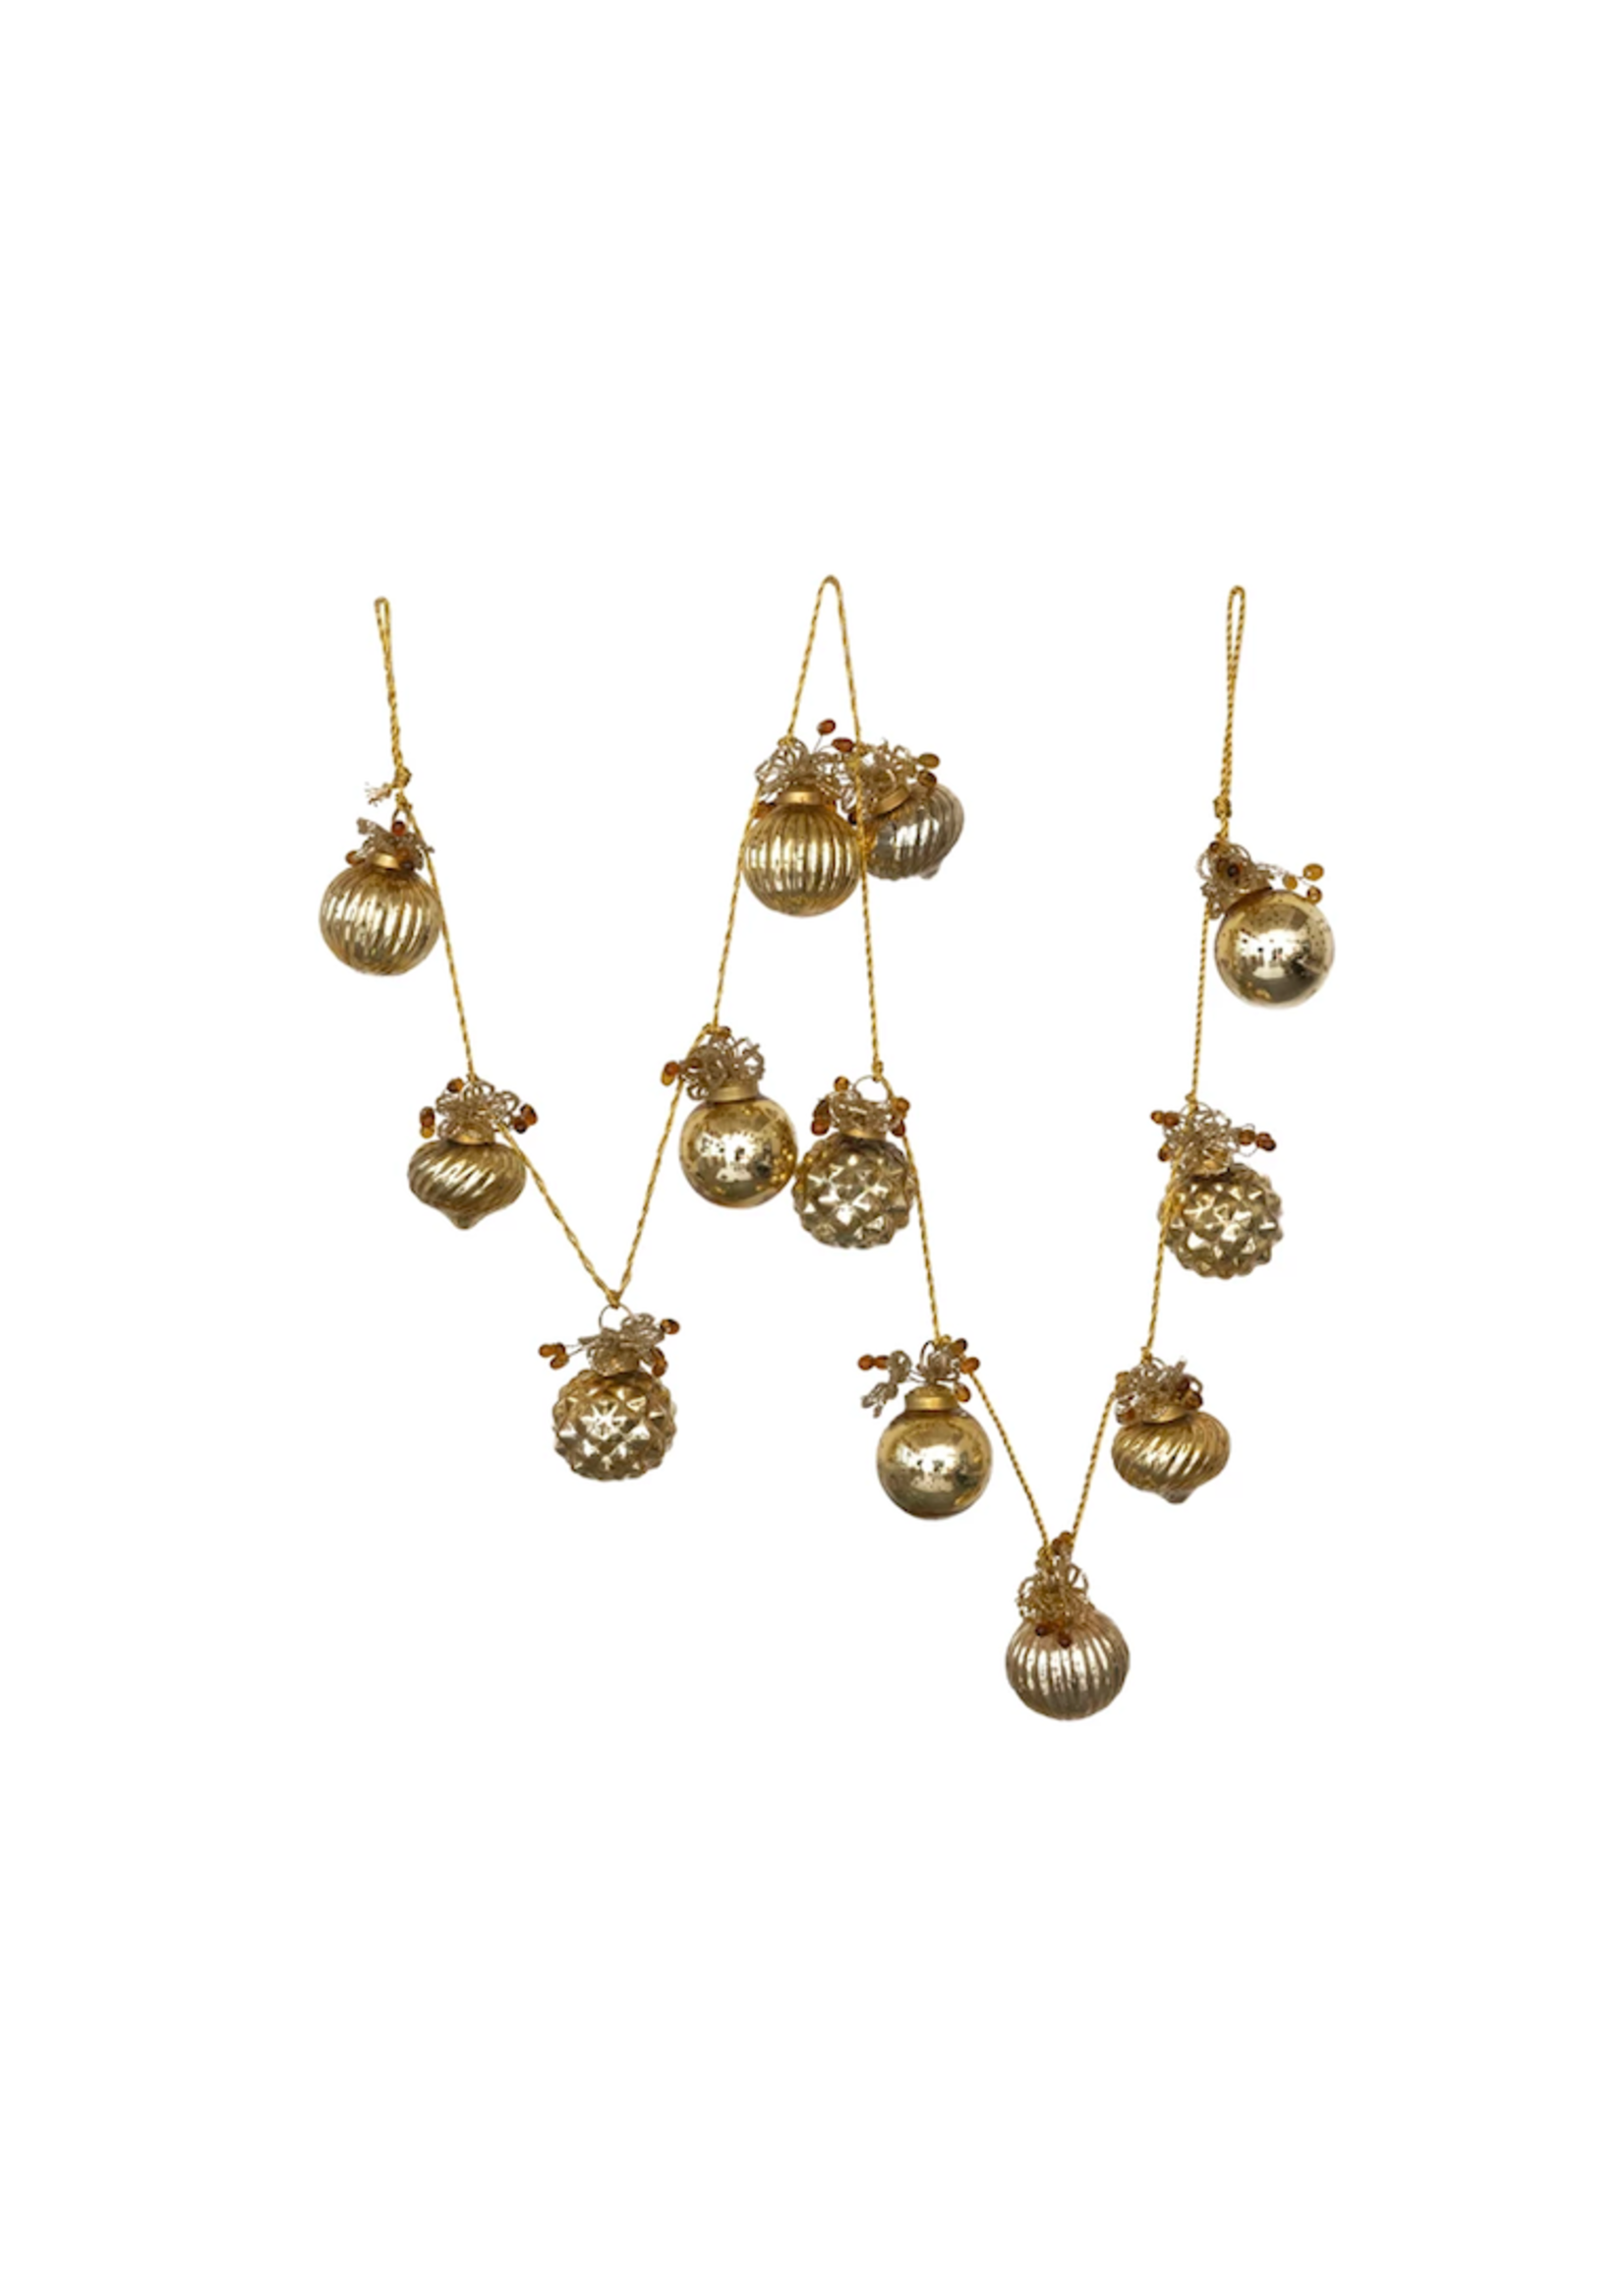 Creative Co-Op Embosses Mercury Glass Ball Garland with Beads, Gold Finish 72"